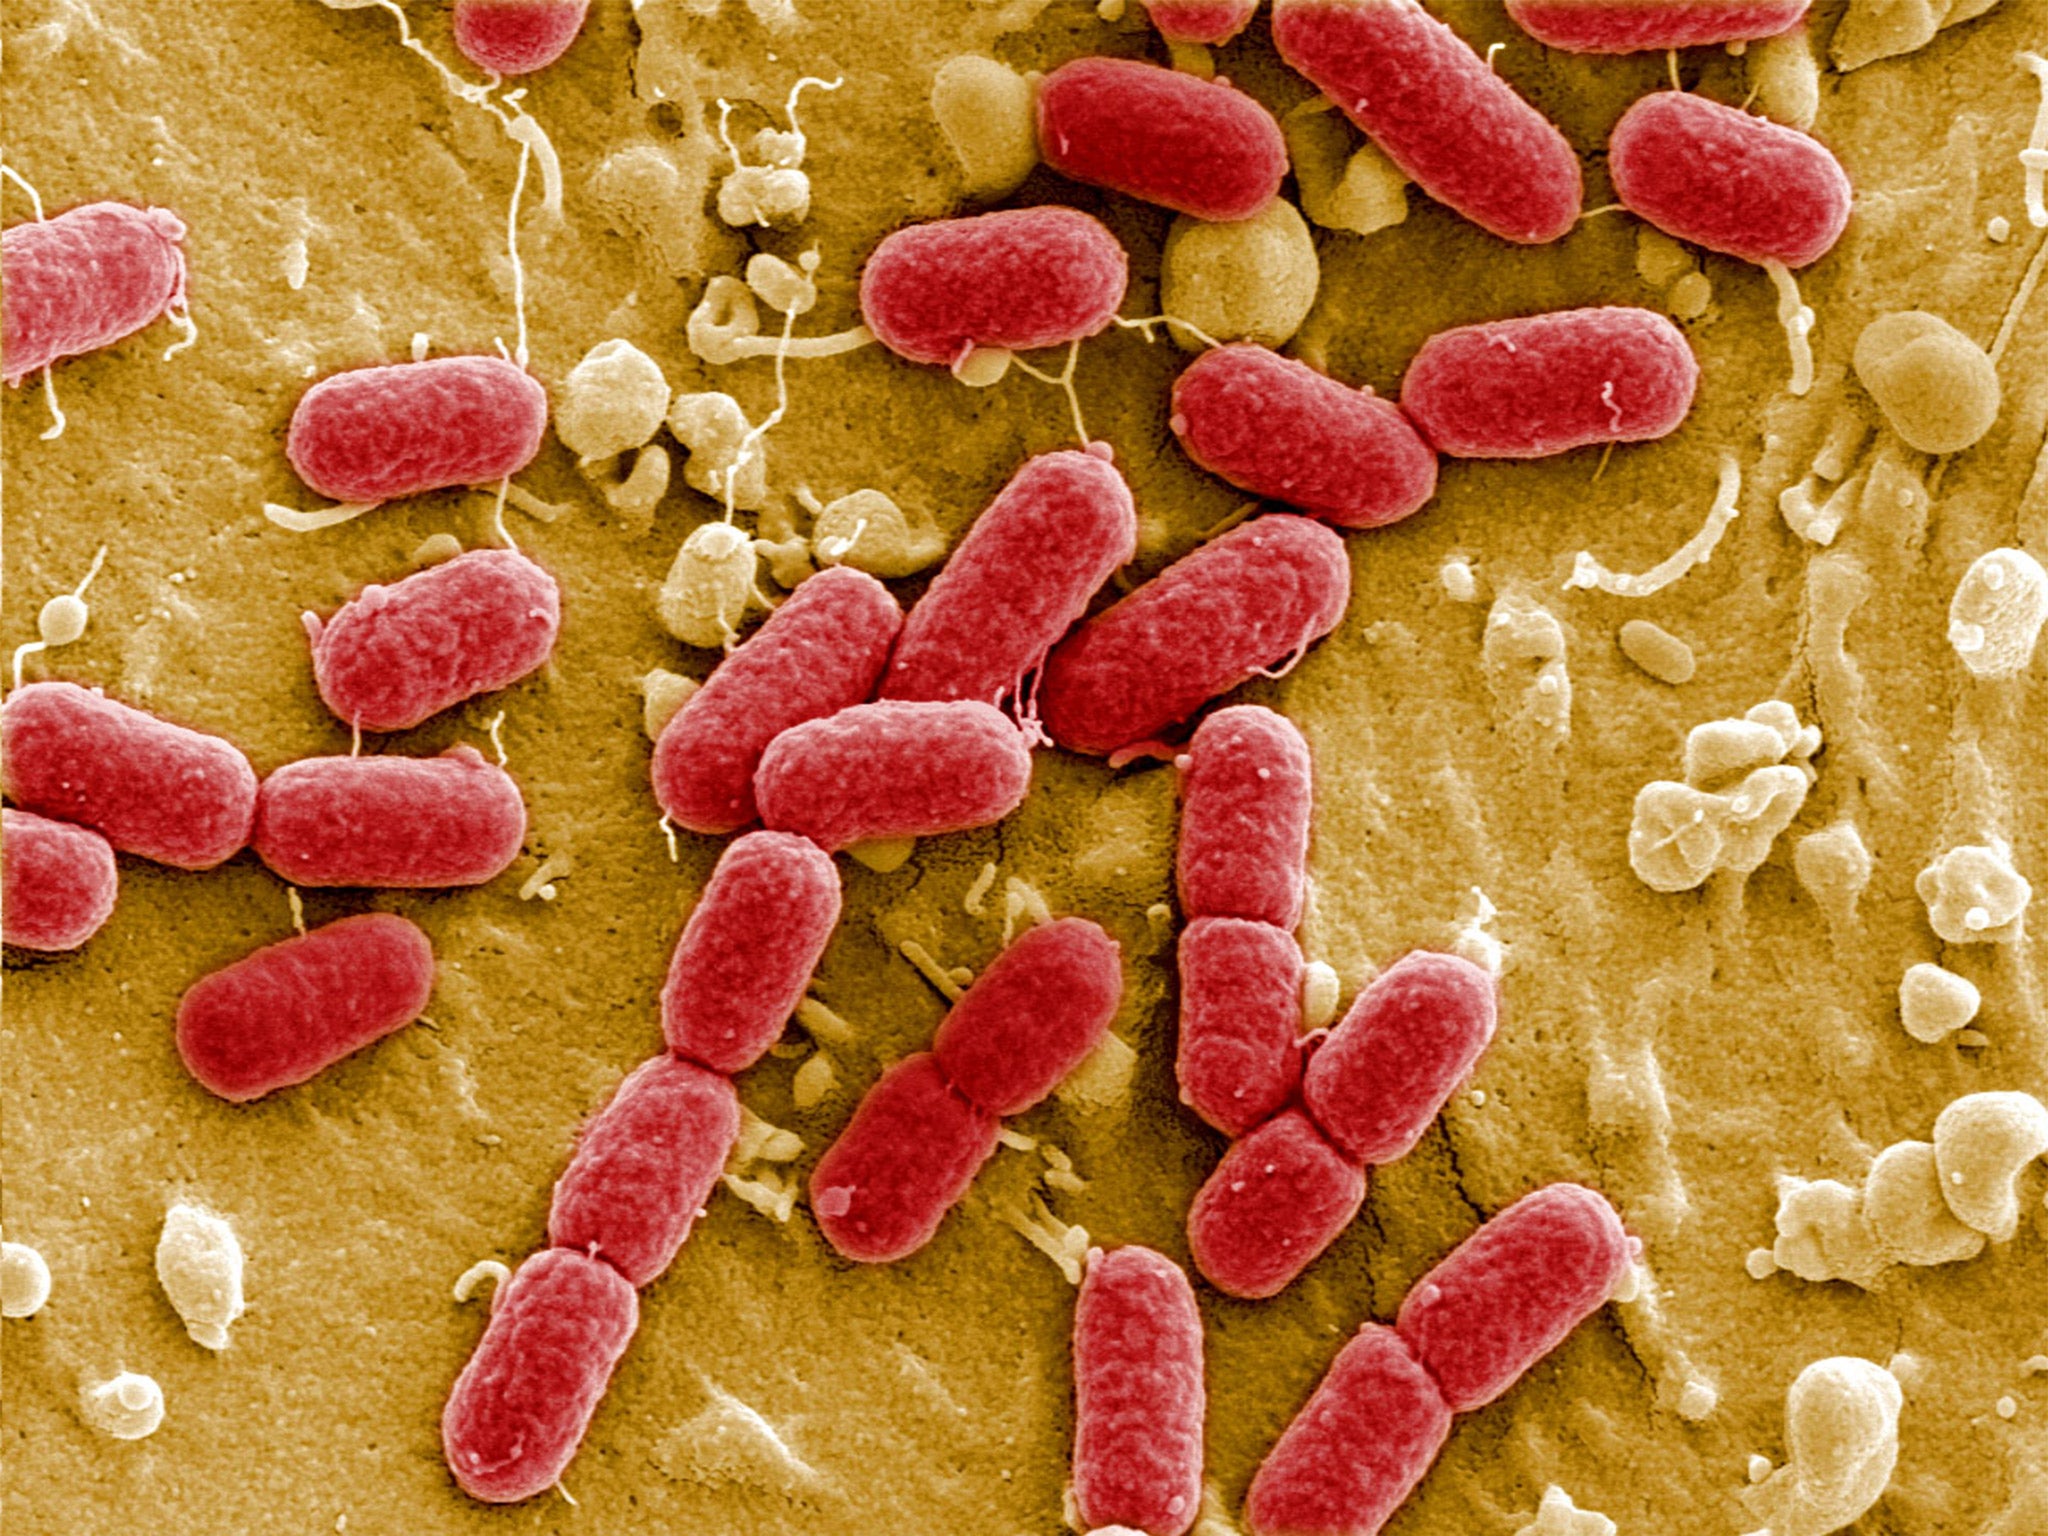 Antimicrobial resistance occurs when bacteria evolve genetically so that they cannot be killed by antibiotic drugs